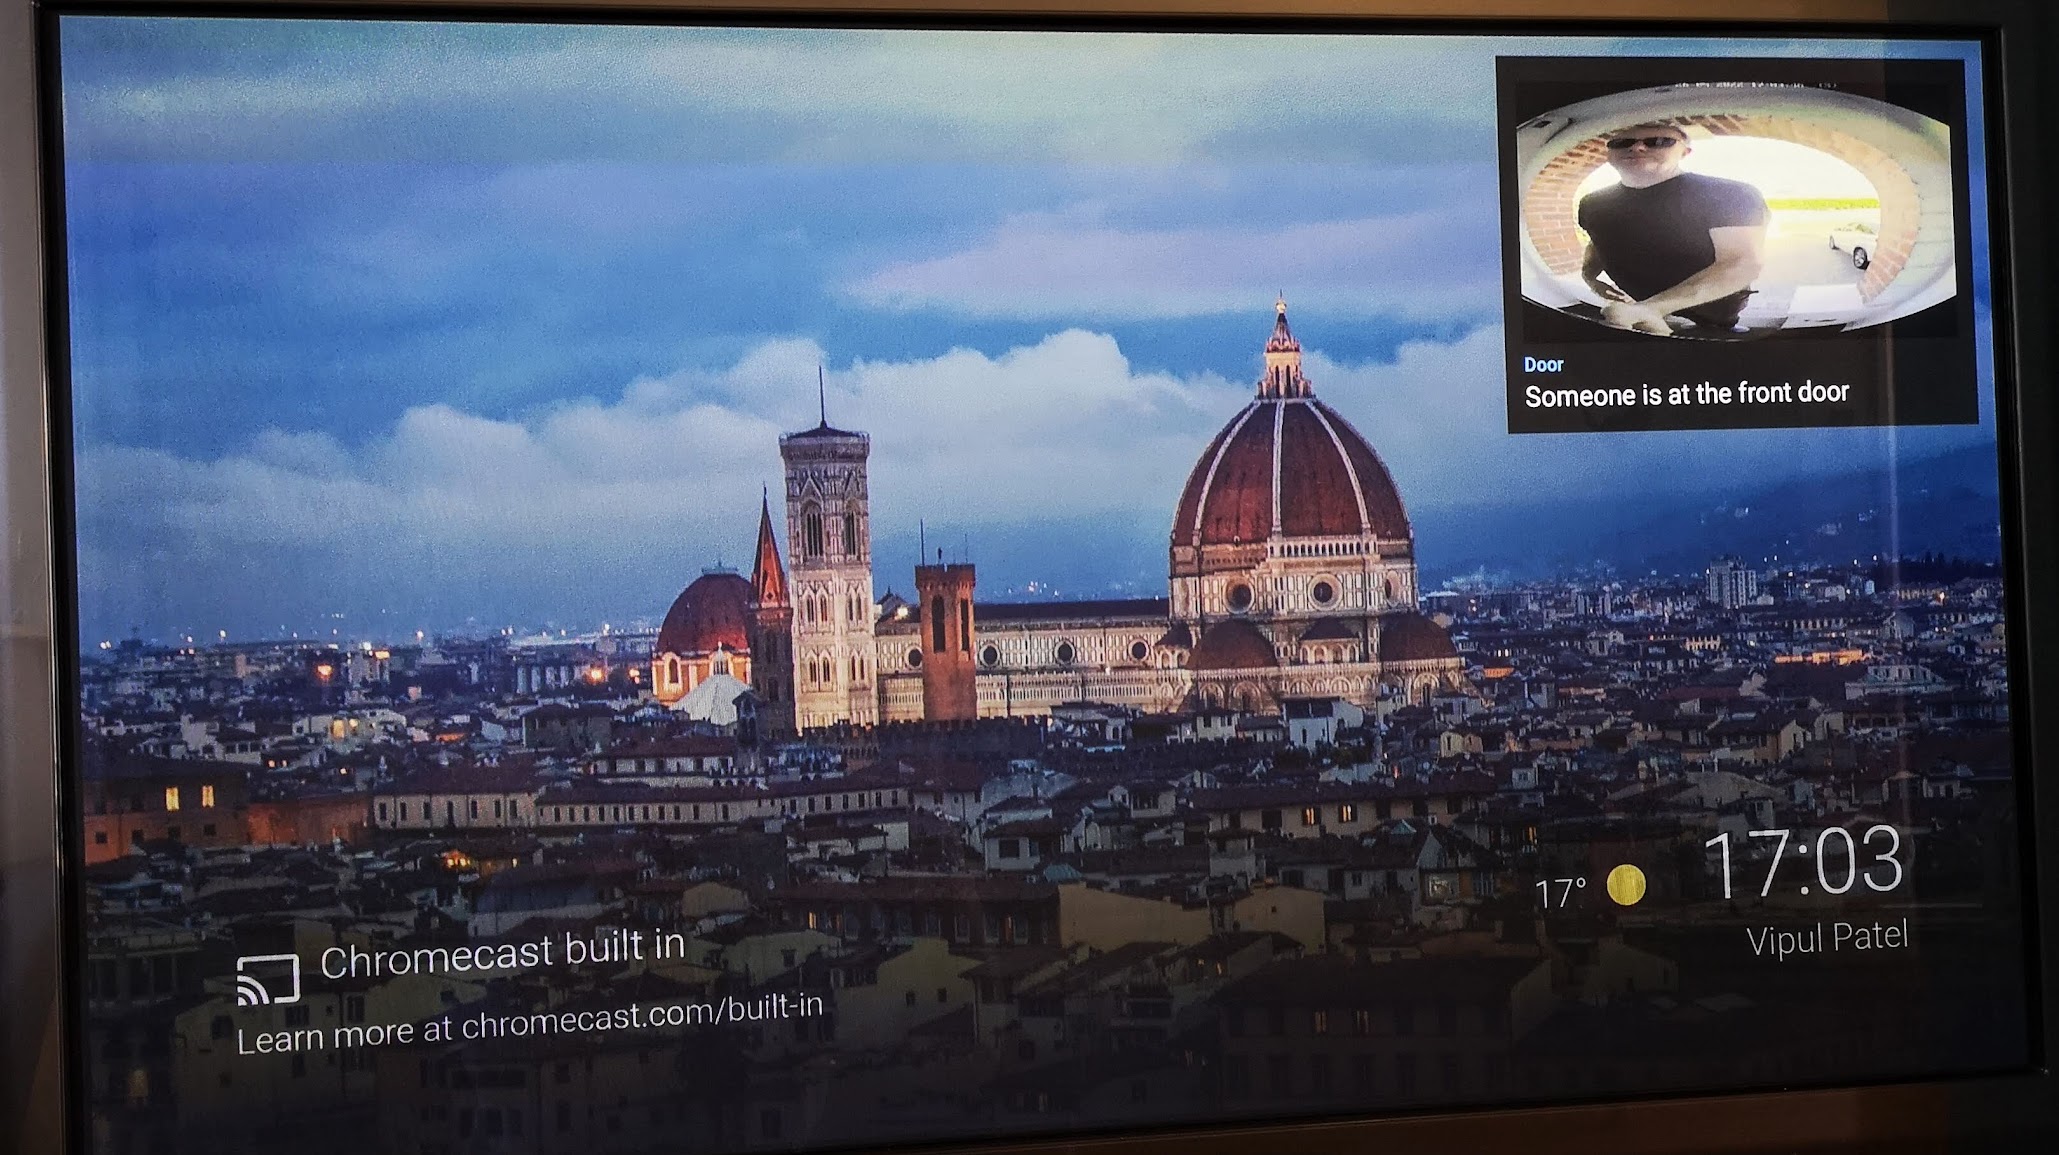 Live doorbell feed displayed picture-in-picture on Android TV